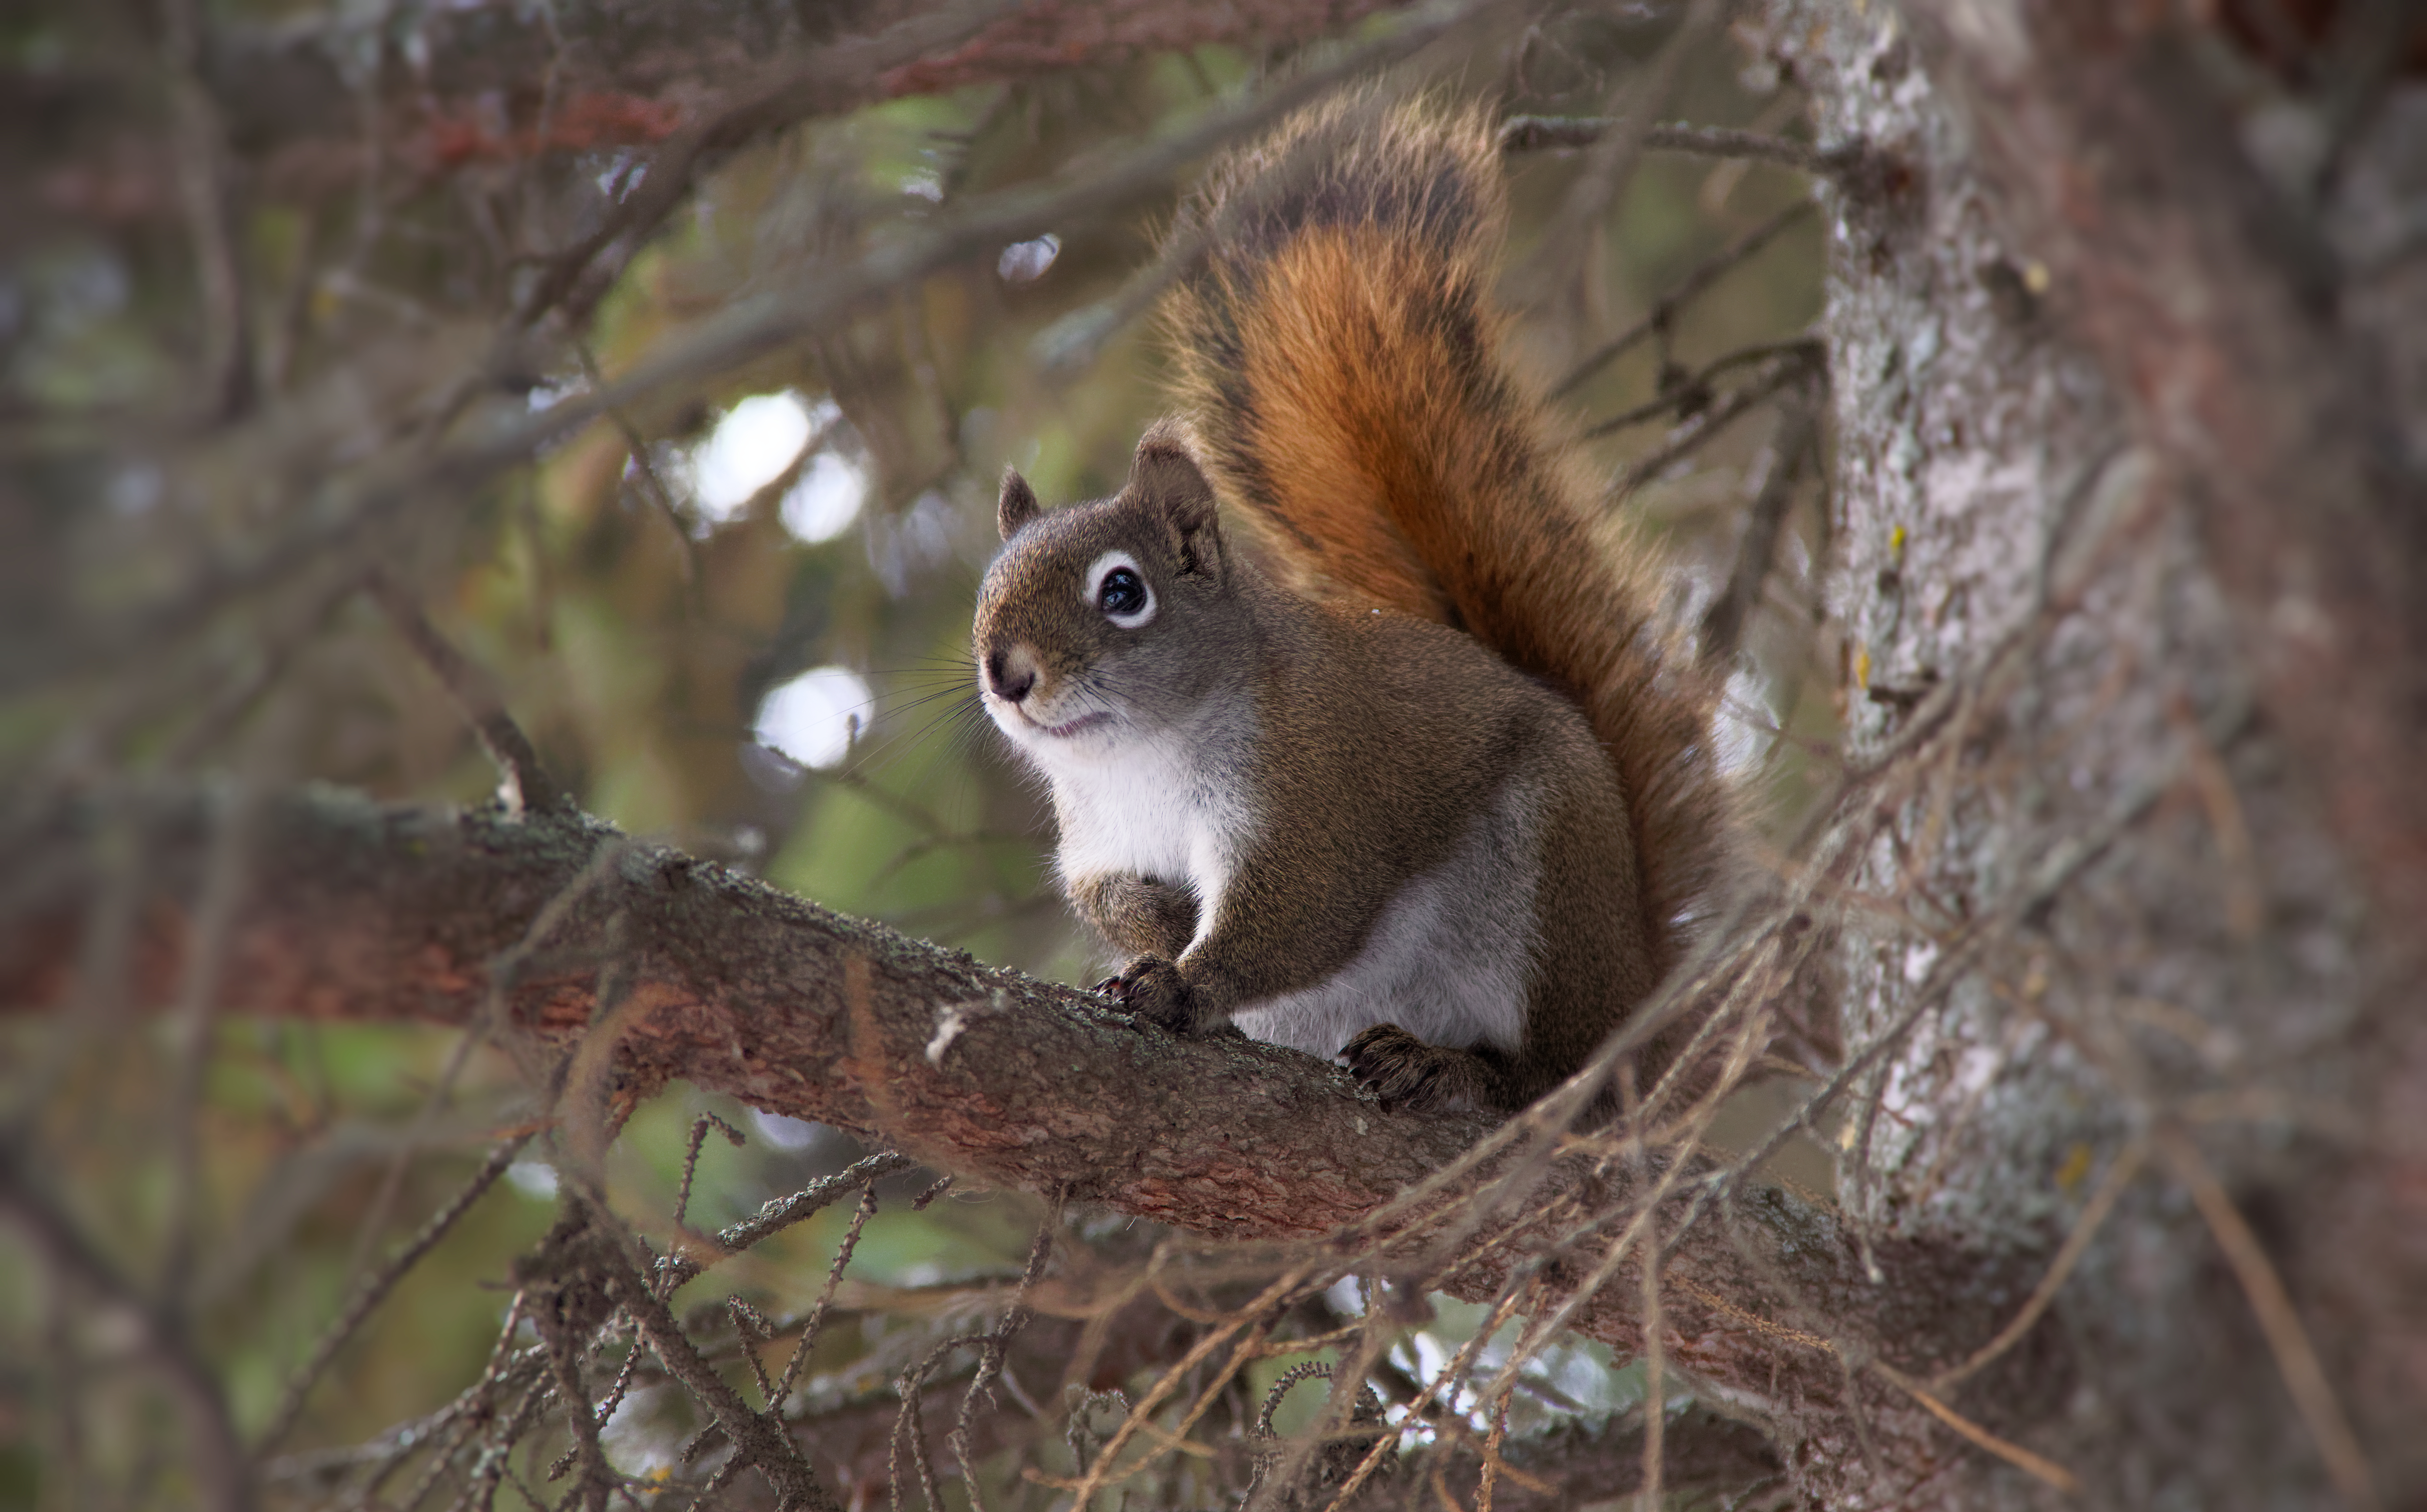 Squirrel Animal Fluffy Cute Tree Branches